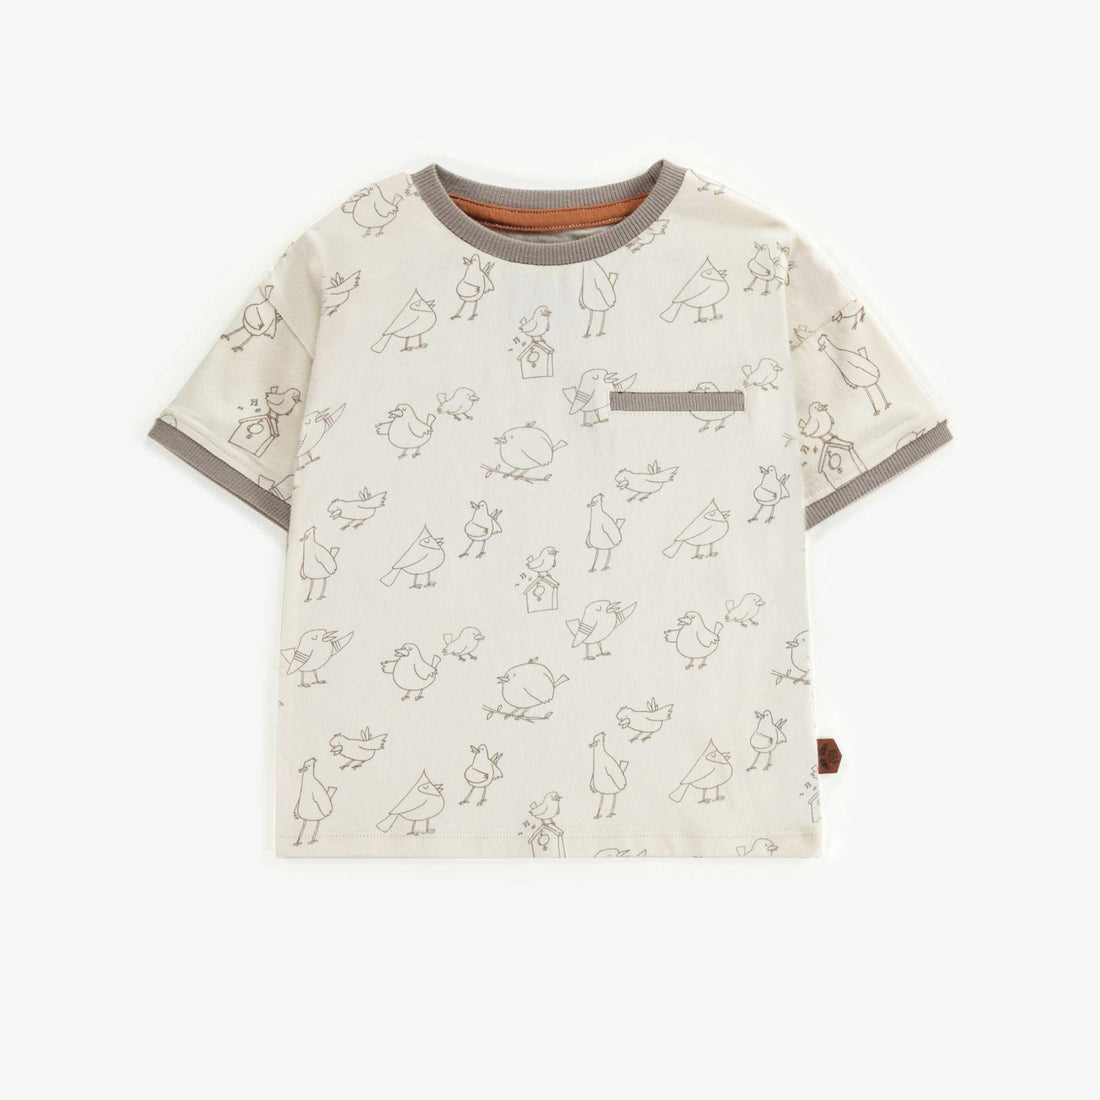 CREAM T-SHIRT WITH BIRDS PATTERN IN COTTON, BABY